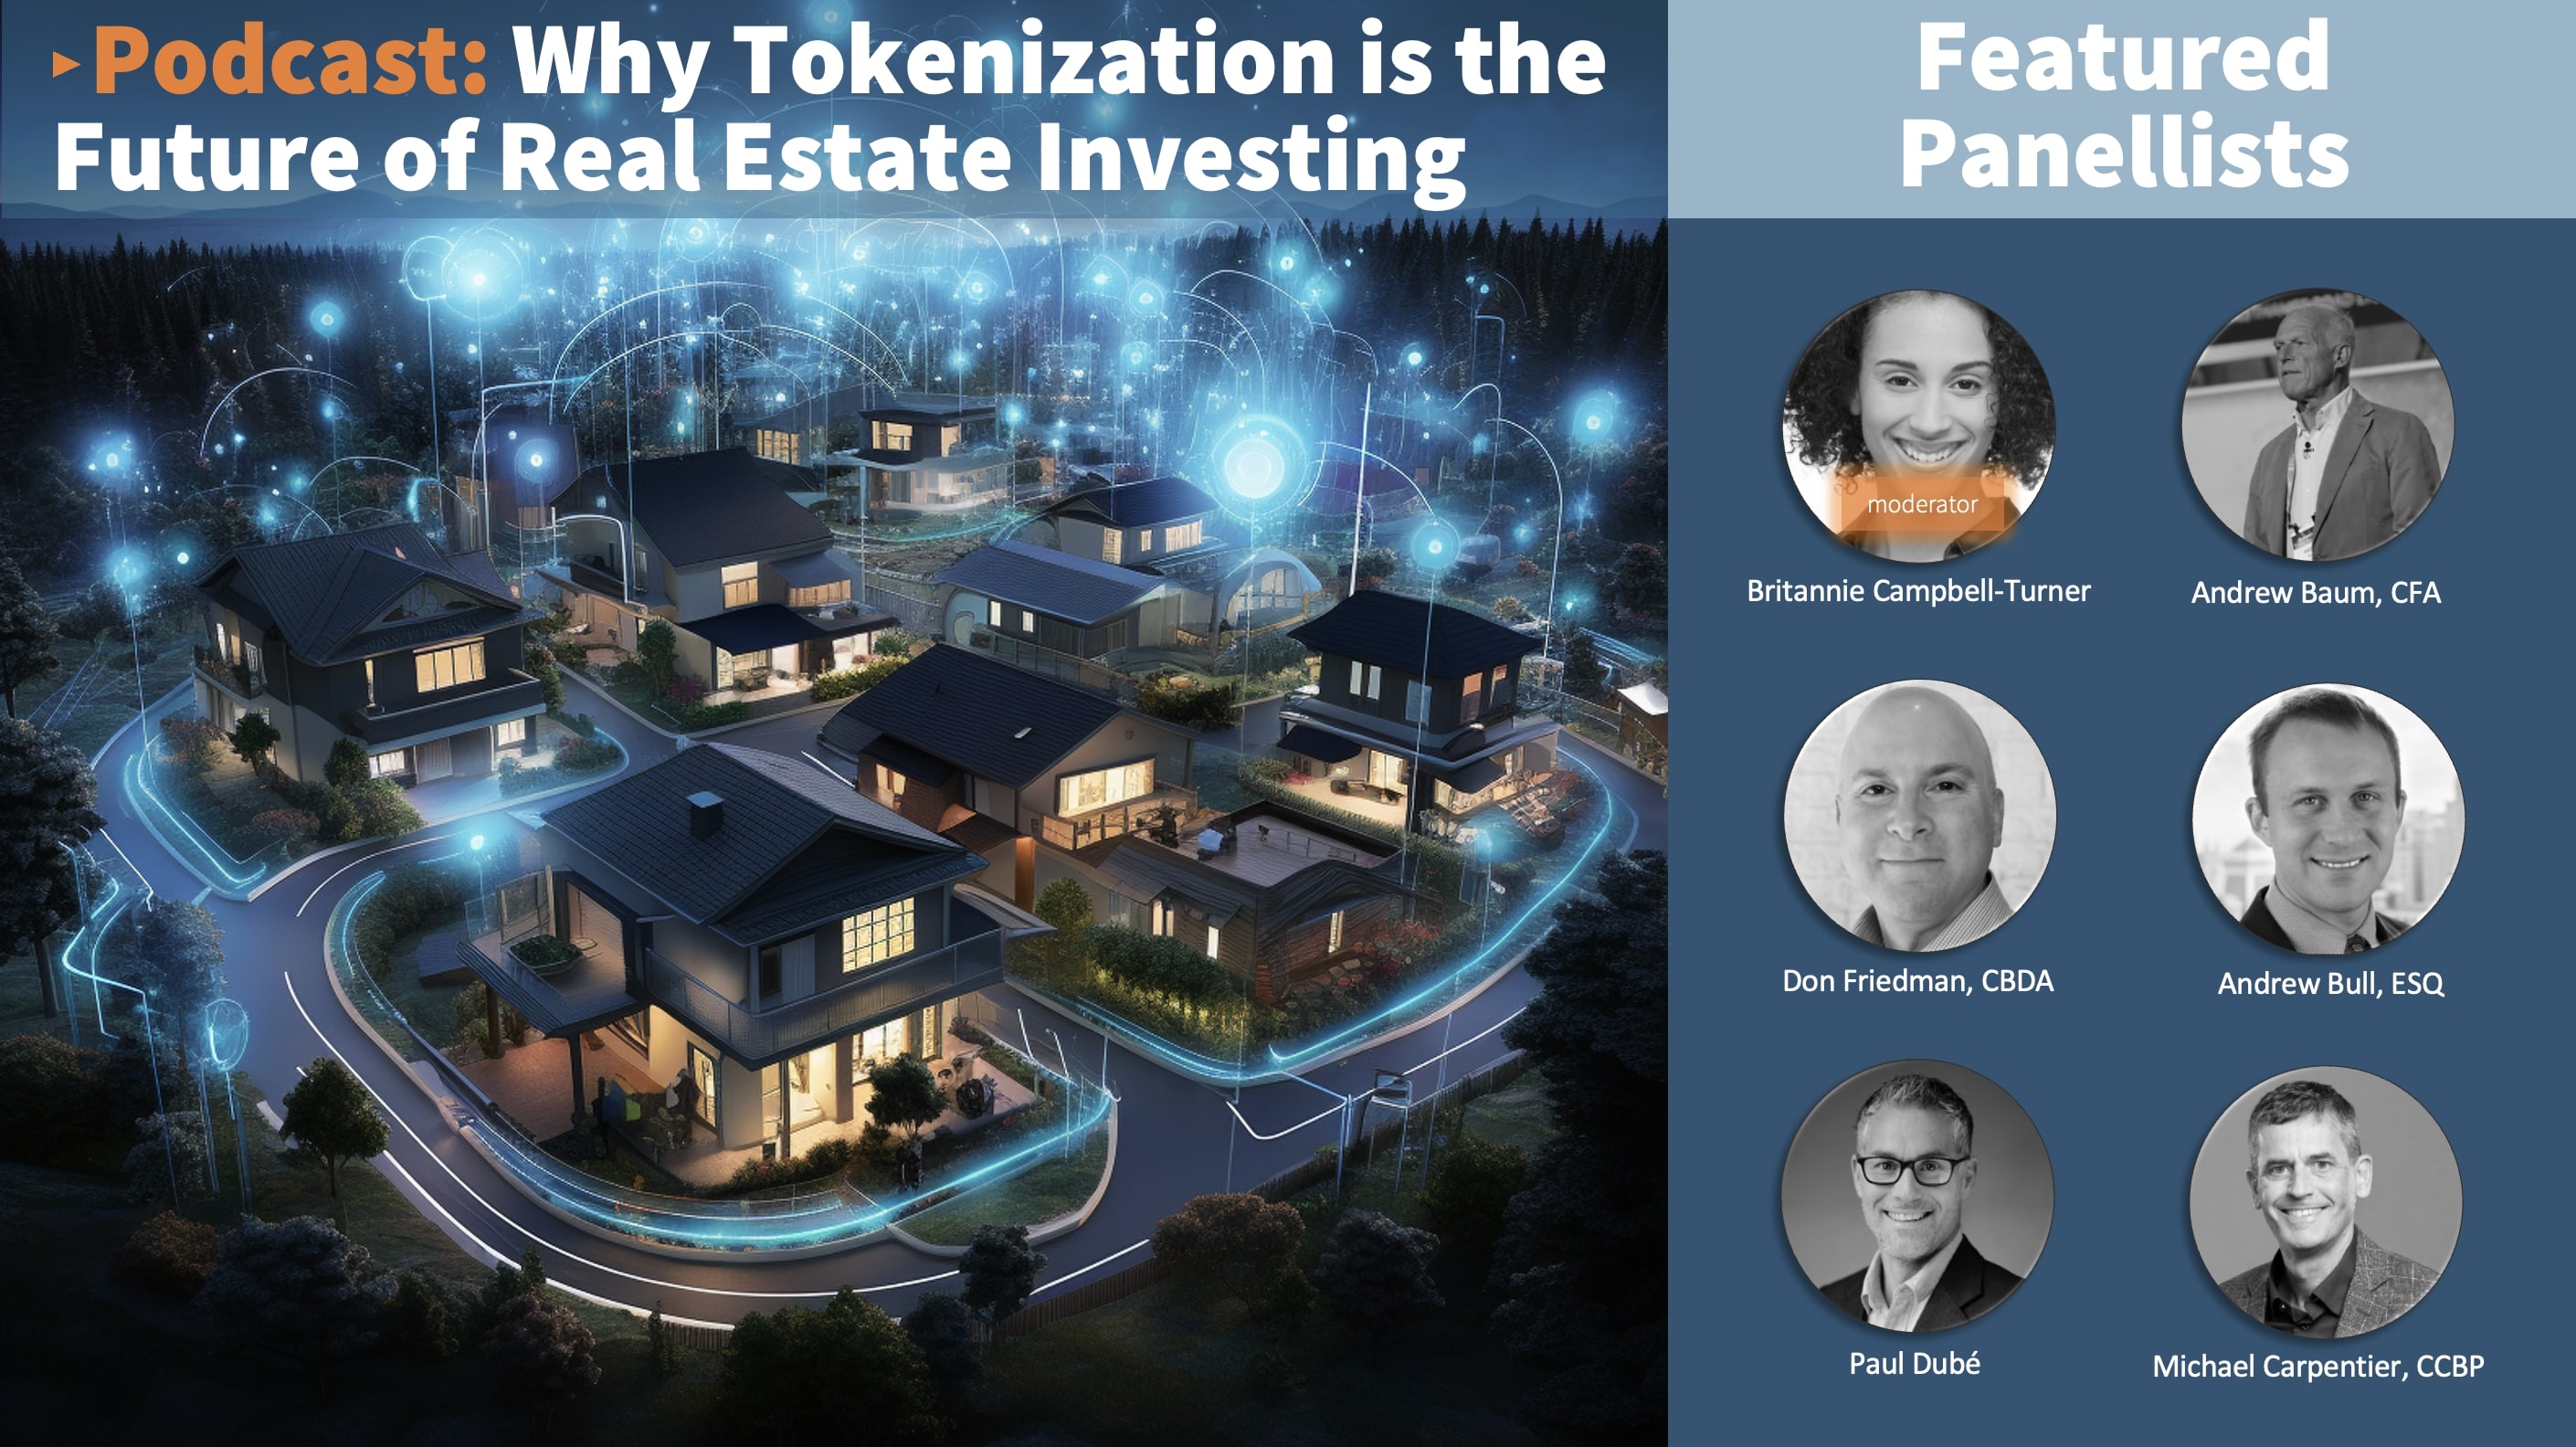 Why Tokenization is the Future of Real Estate Investing